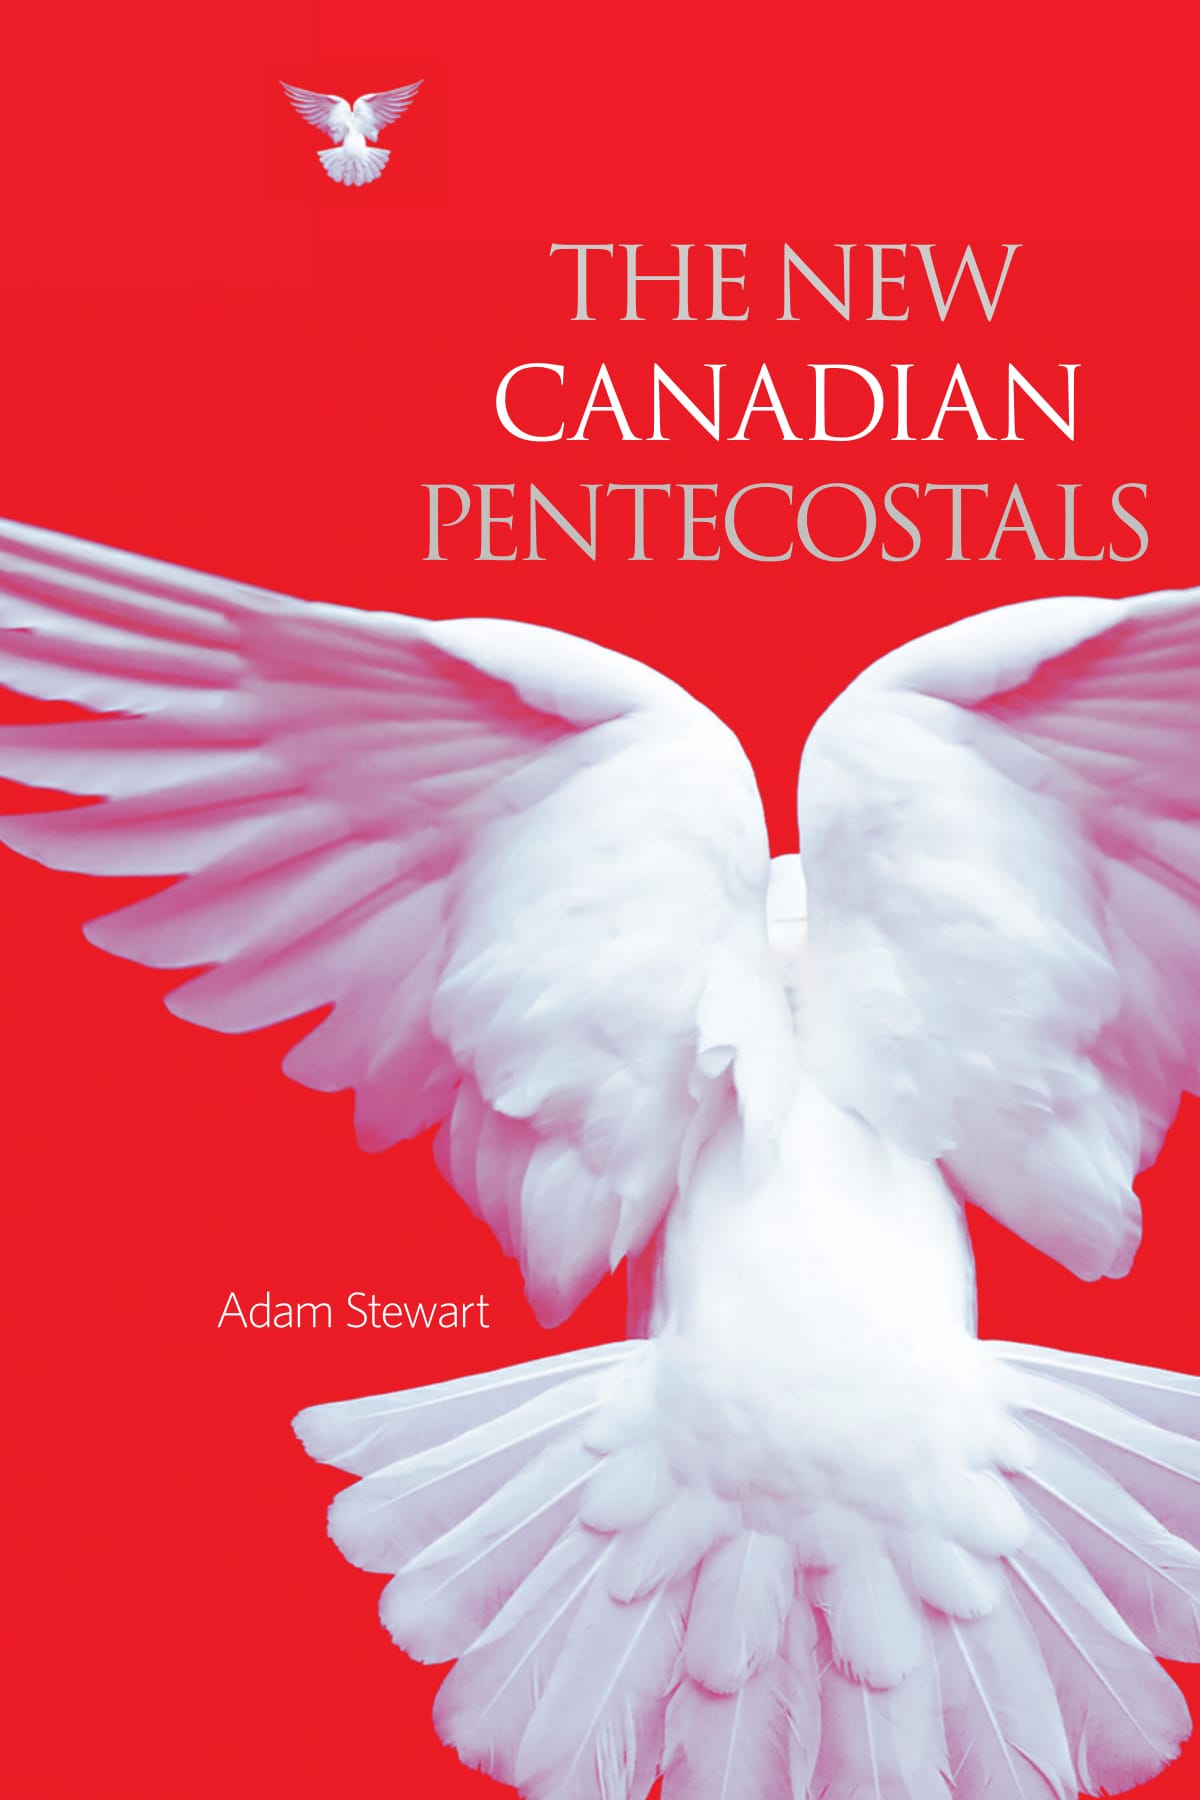 Cover of Adam Stewart's book titled The New Canadian Pentecostals